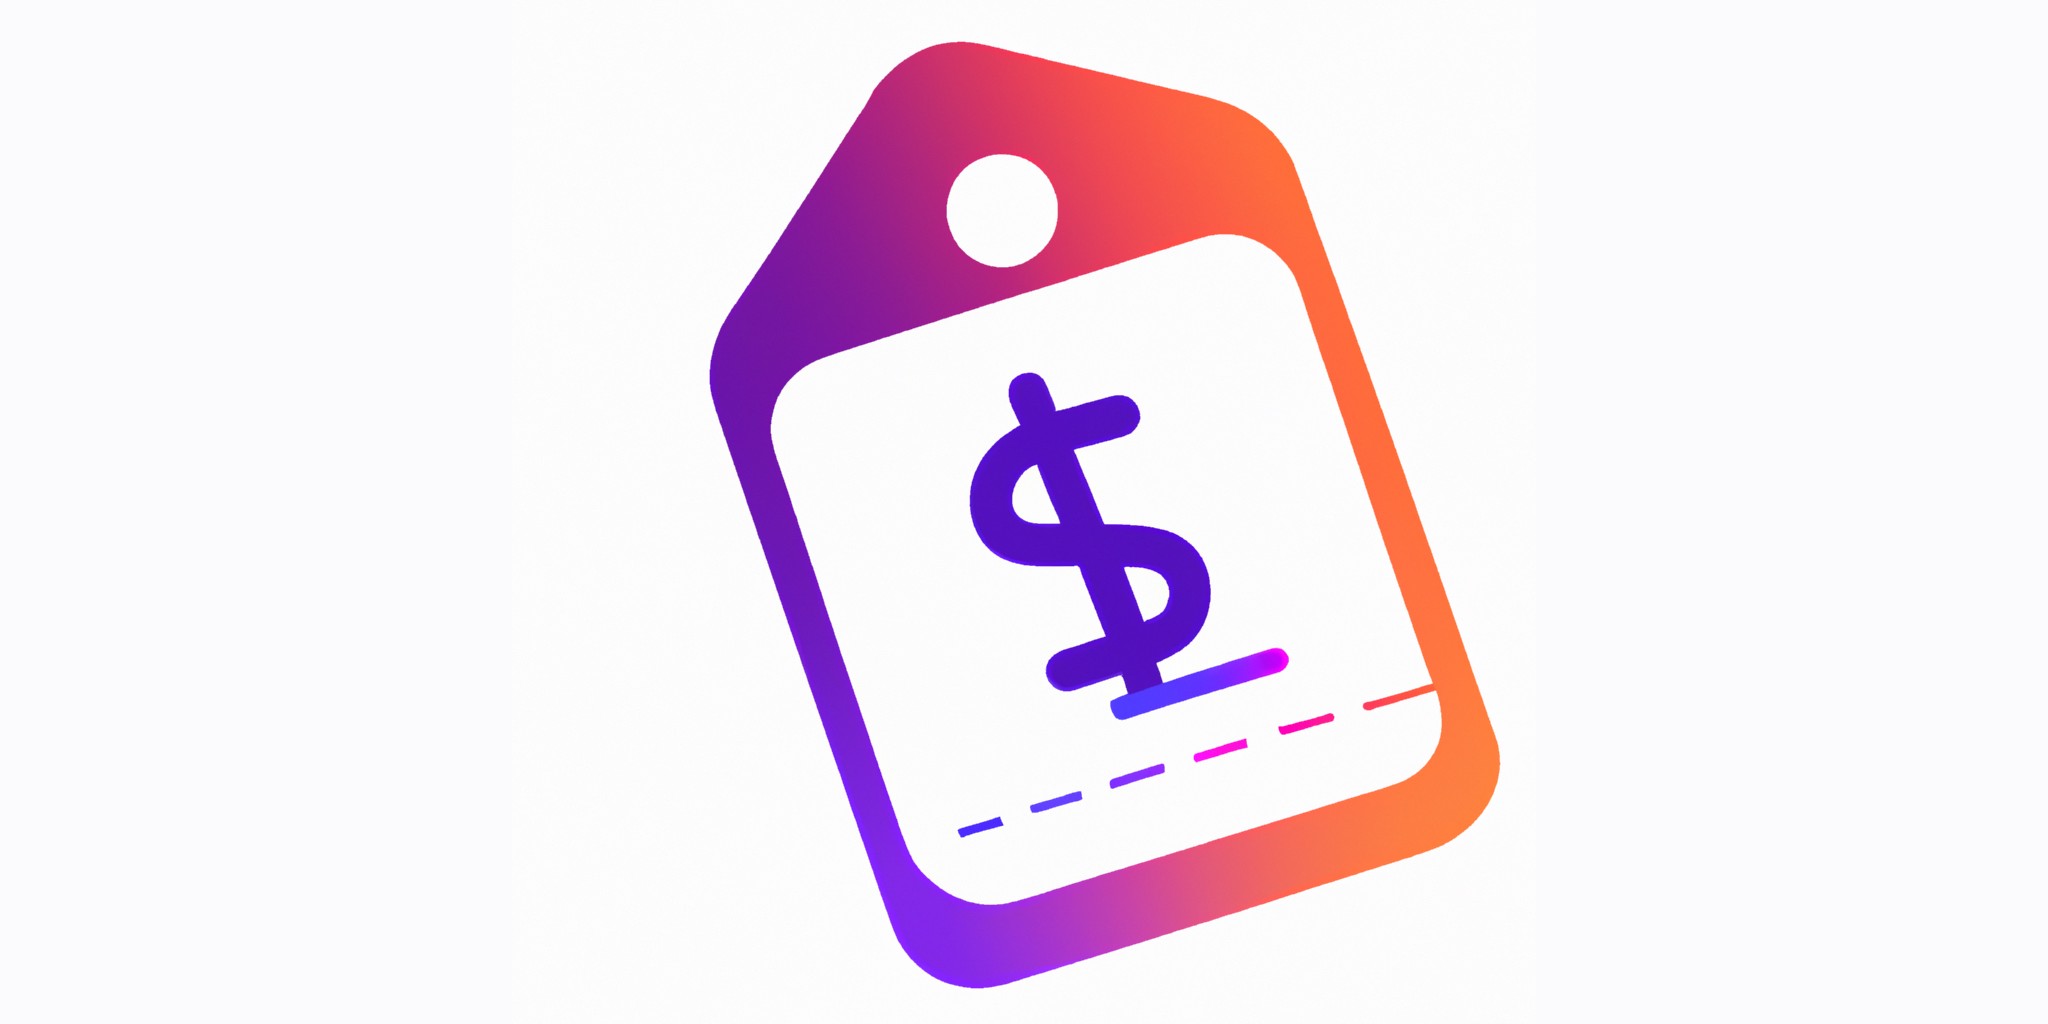 a price tag in flat illustration style with gradients and white background